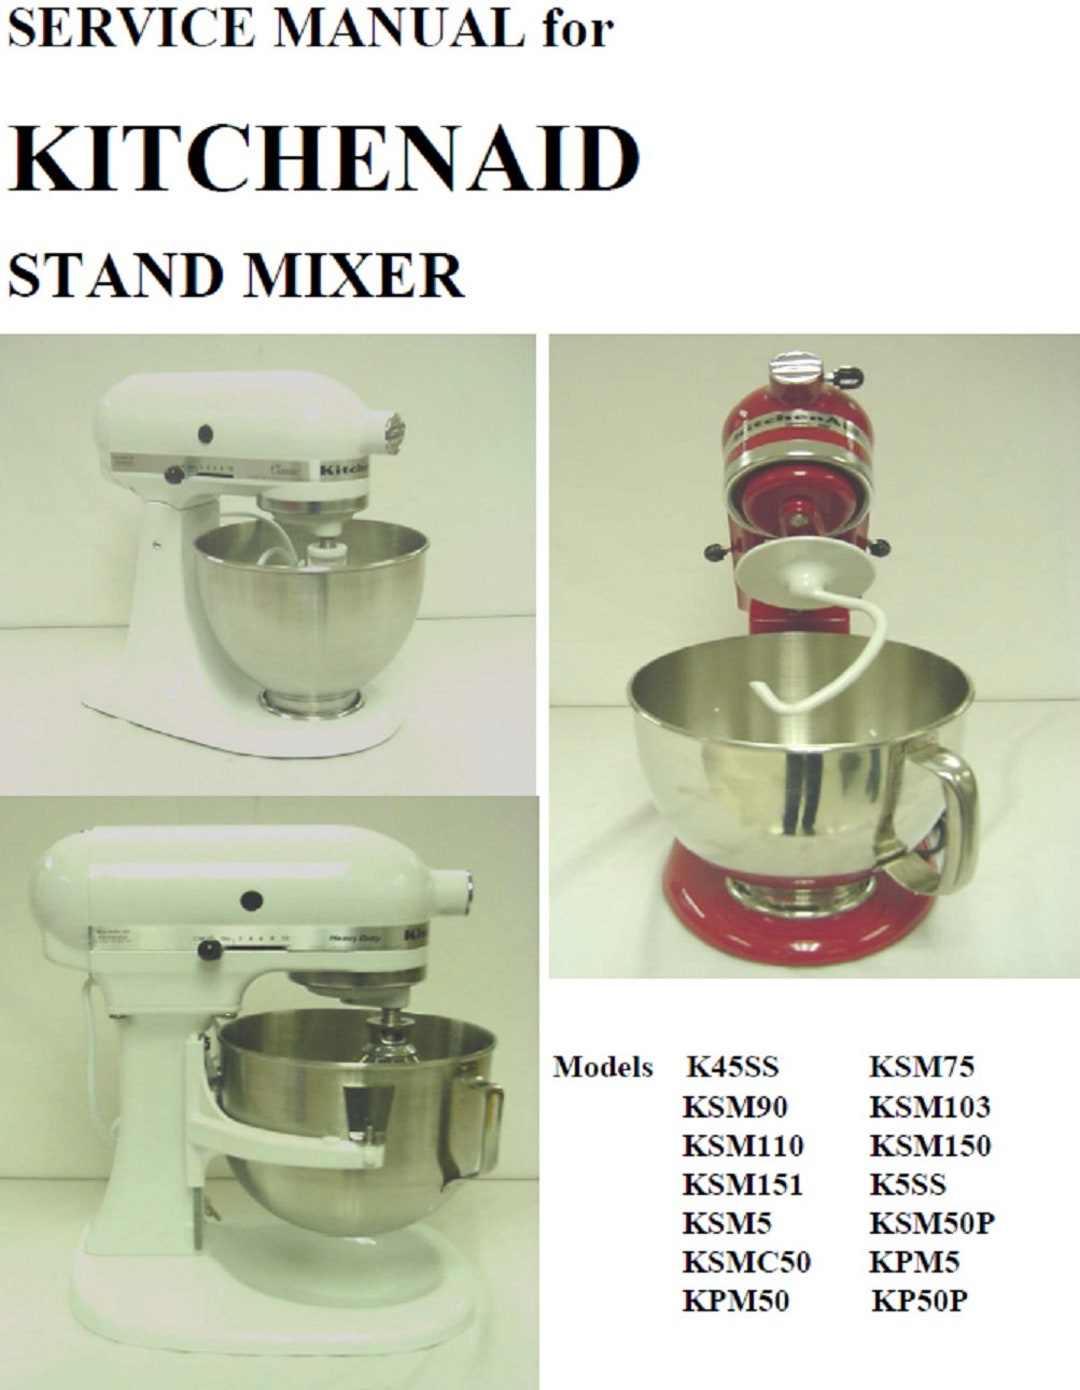 Replacement Parts List for KitchenAid Stand Mixer